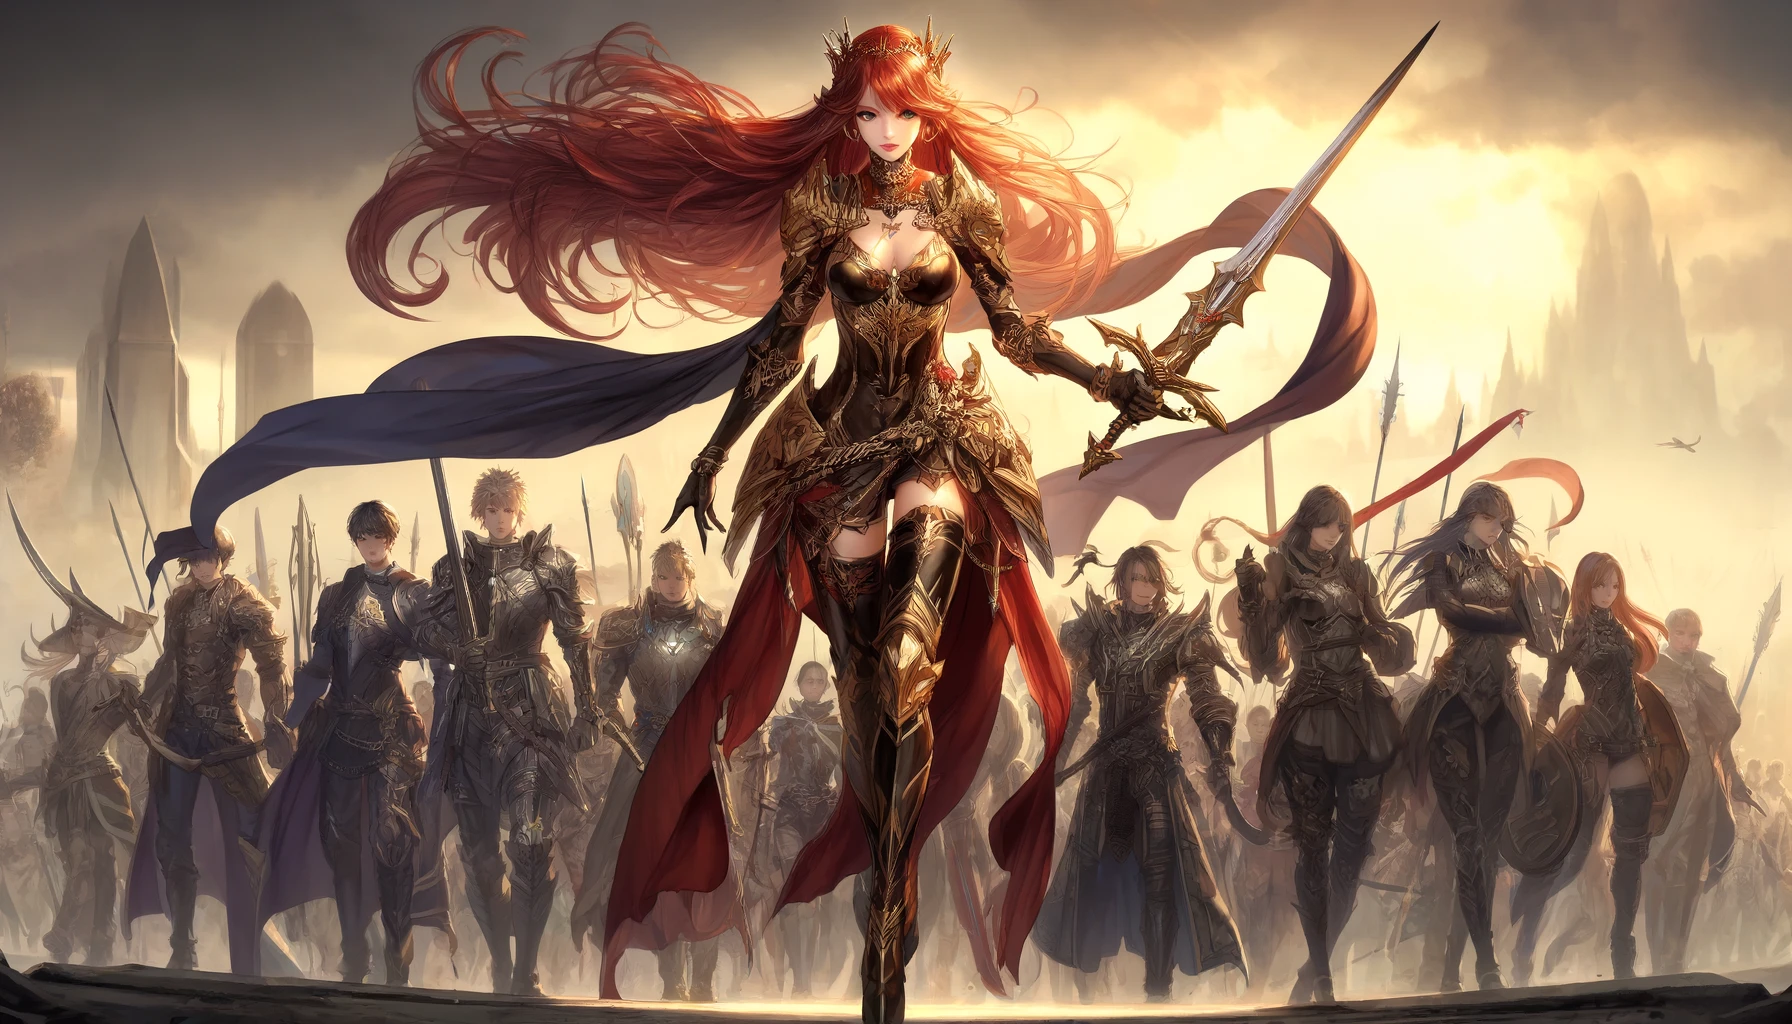 Valkyrie in light armor and with a sword in her hand walks at the head of the squad.